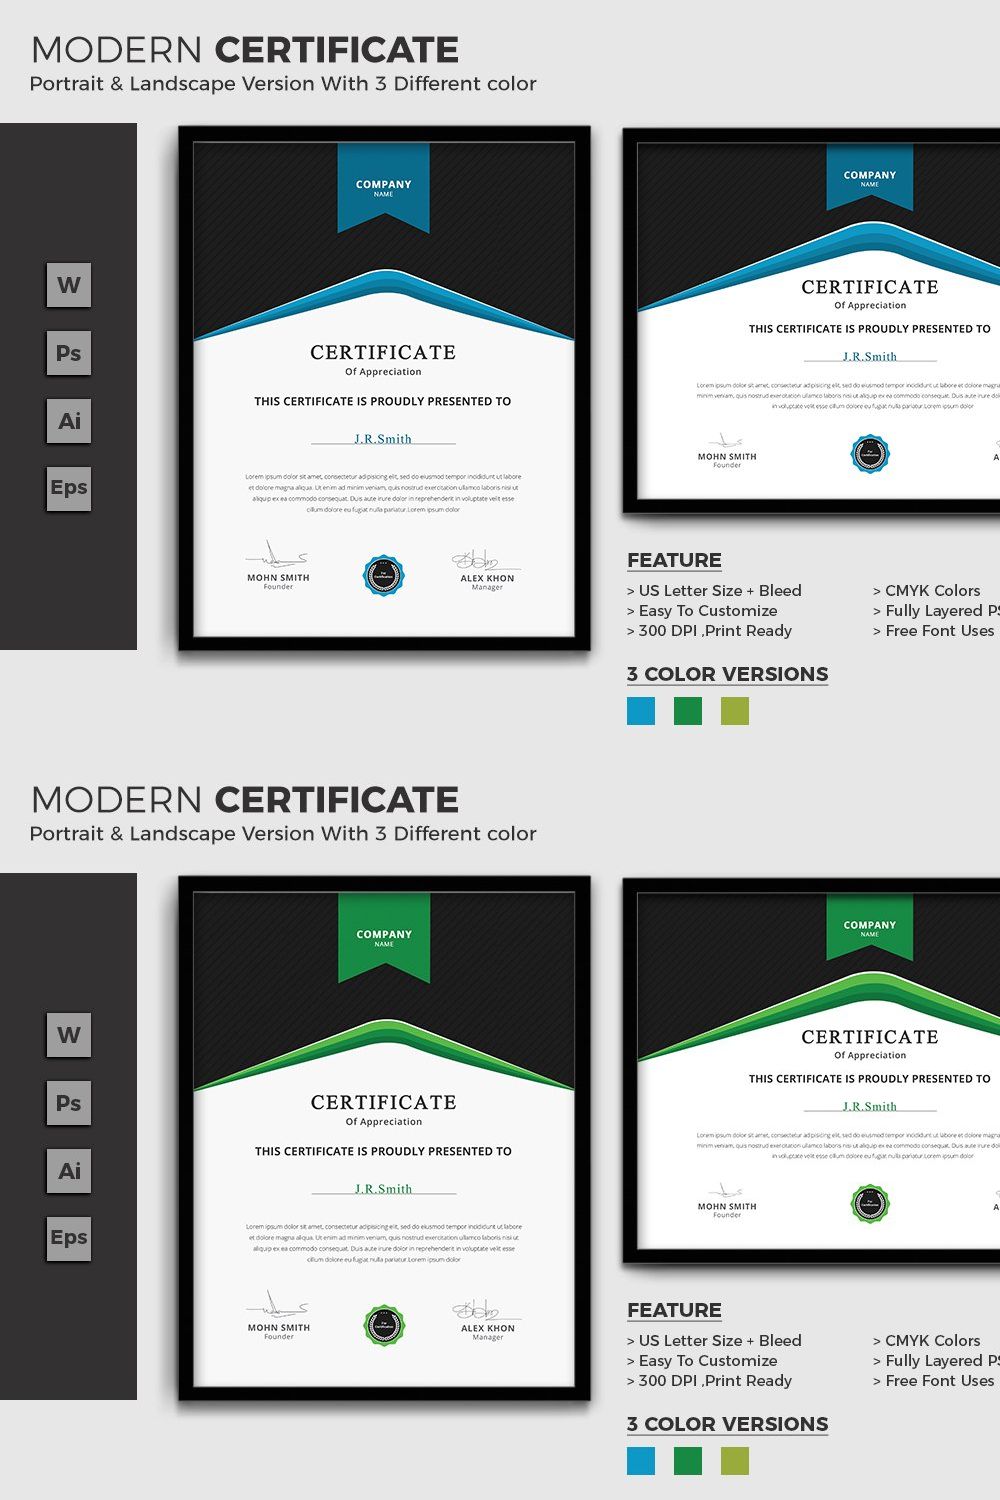 Certificate pinterest preview image.